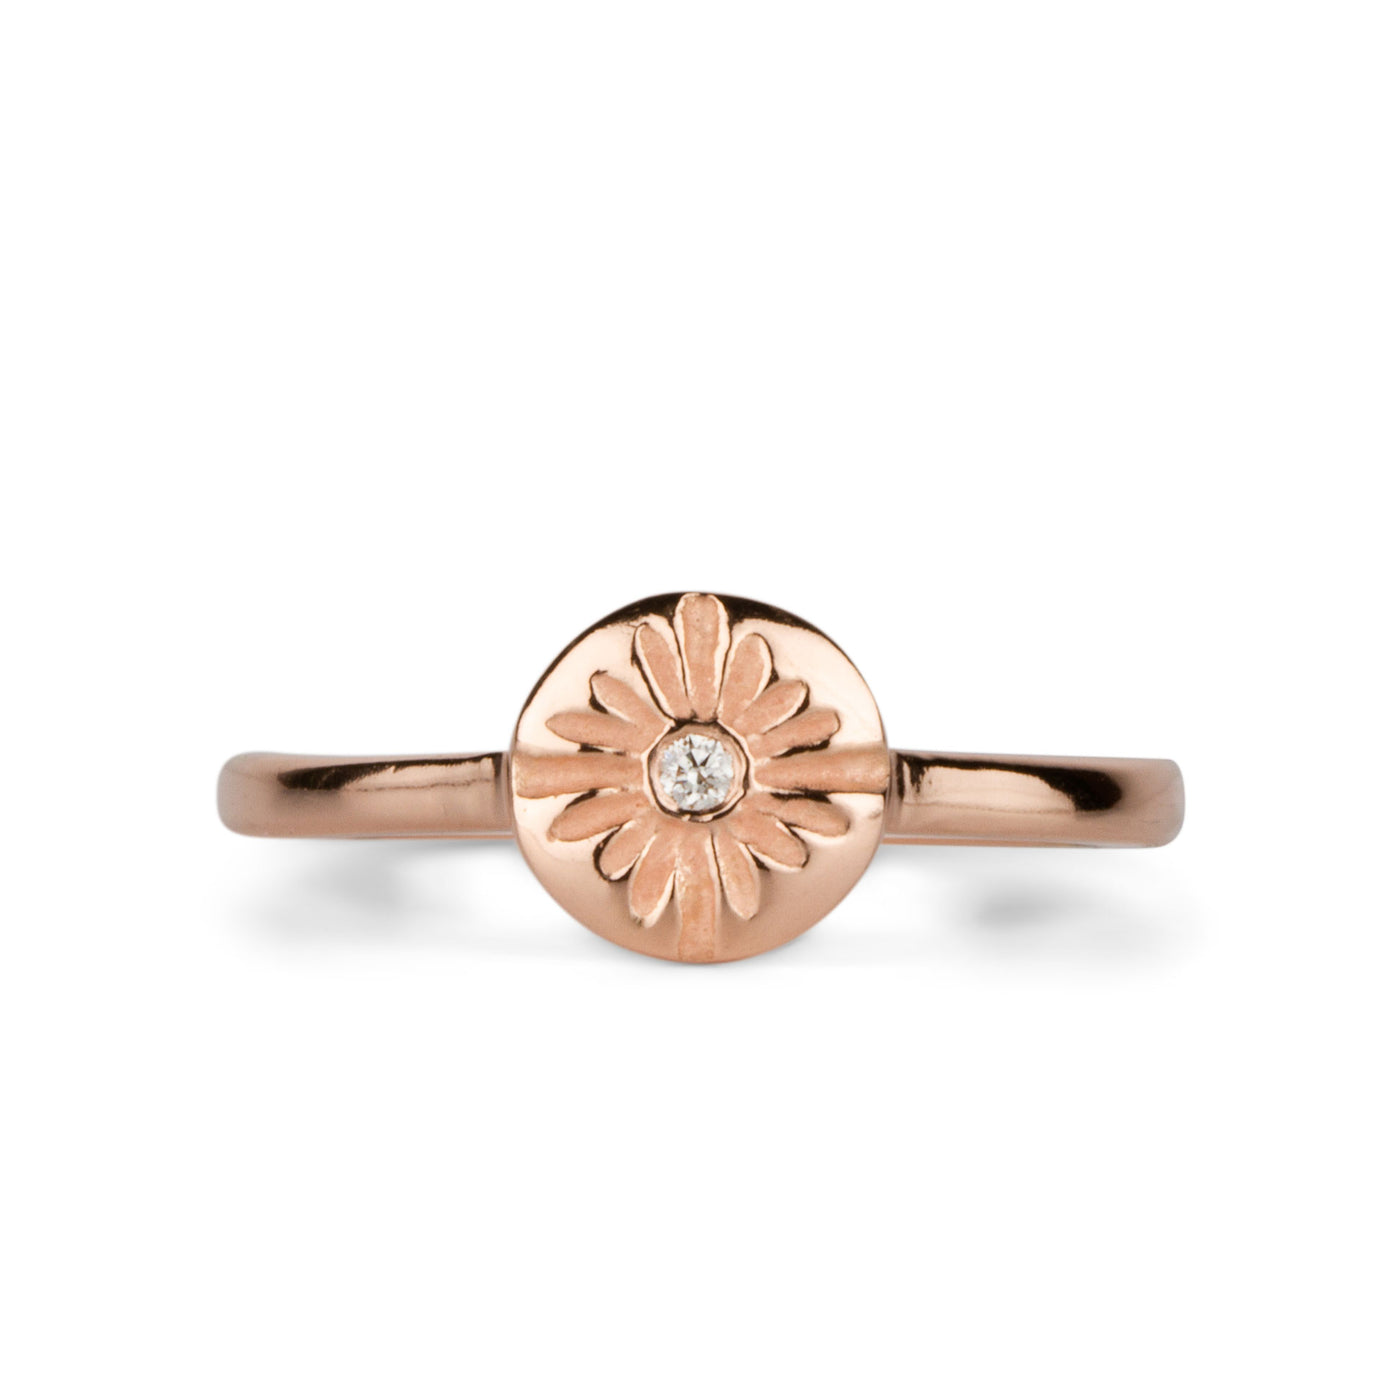 Lucia Small Rose Gold and Diamond Ring close up on a white background 